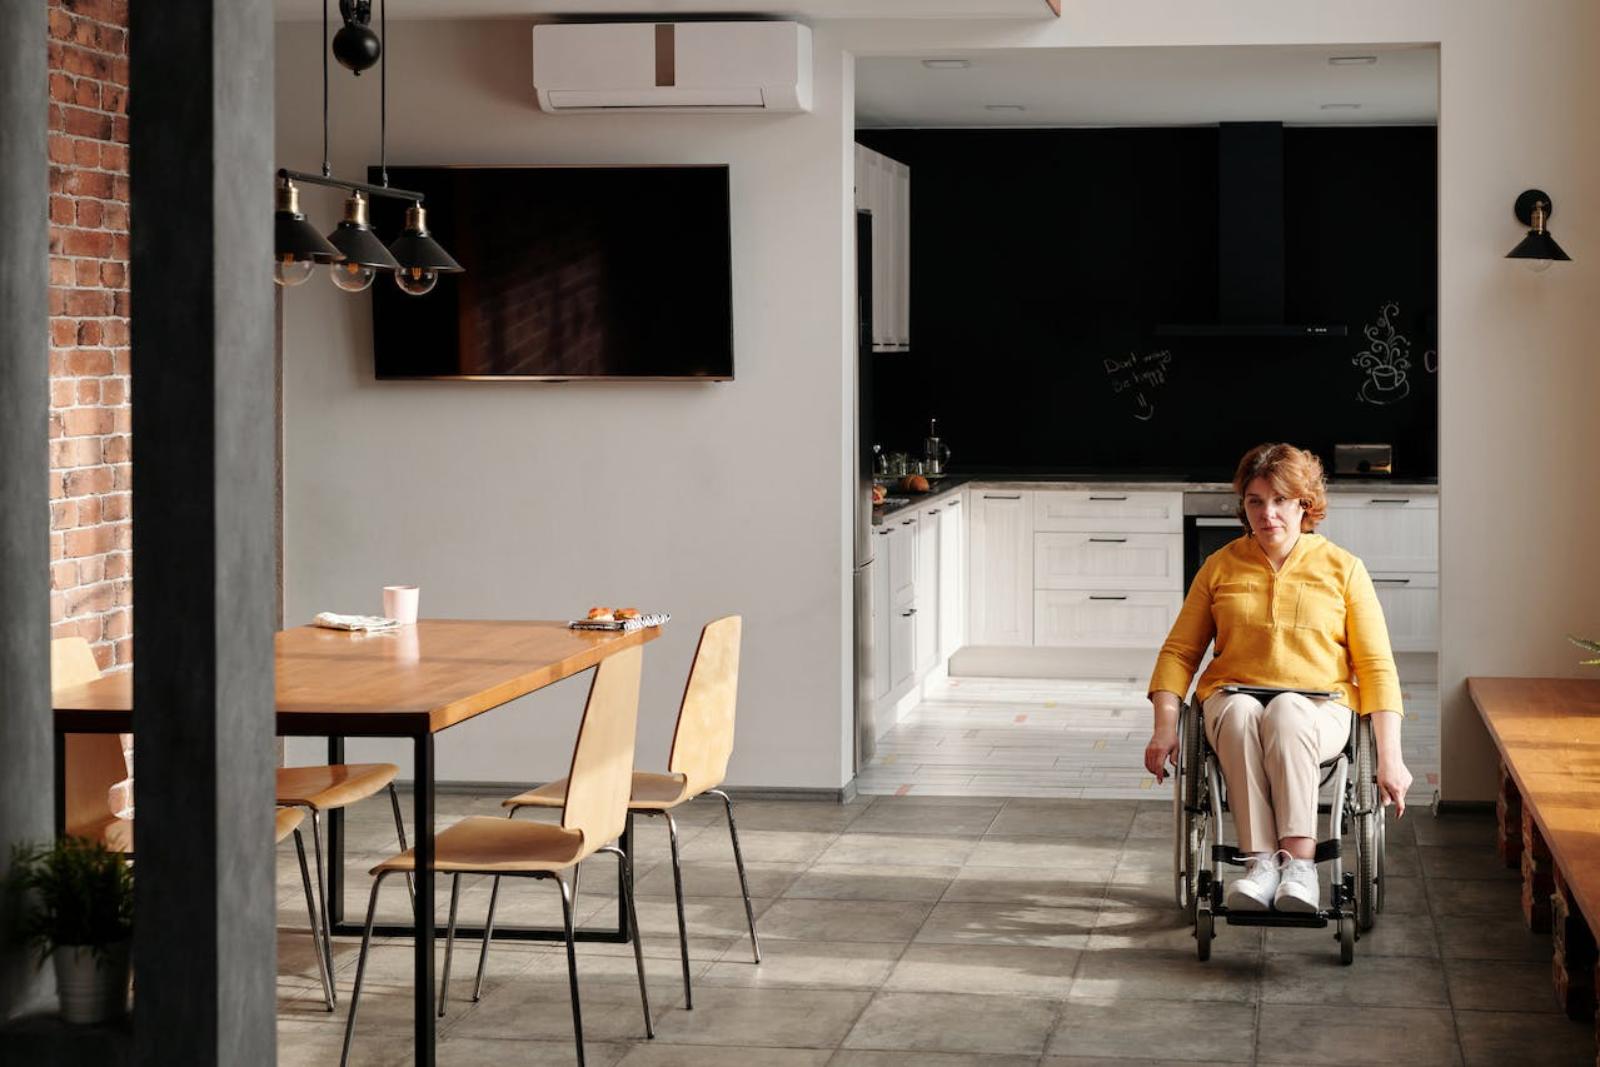 Accessibility in accommodation